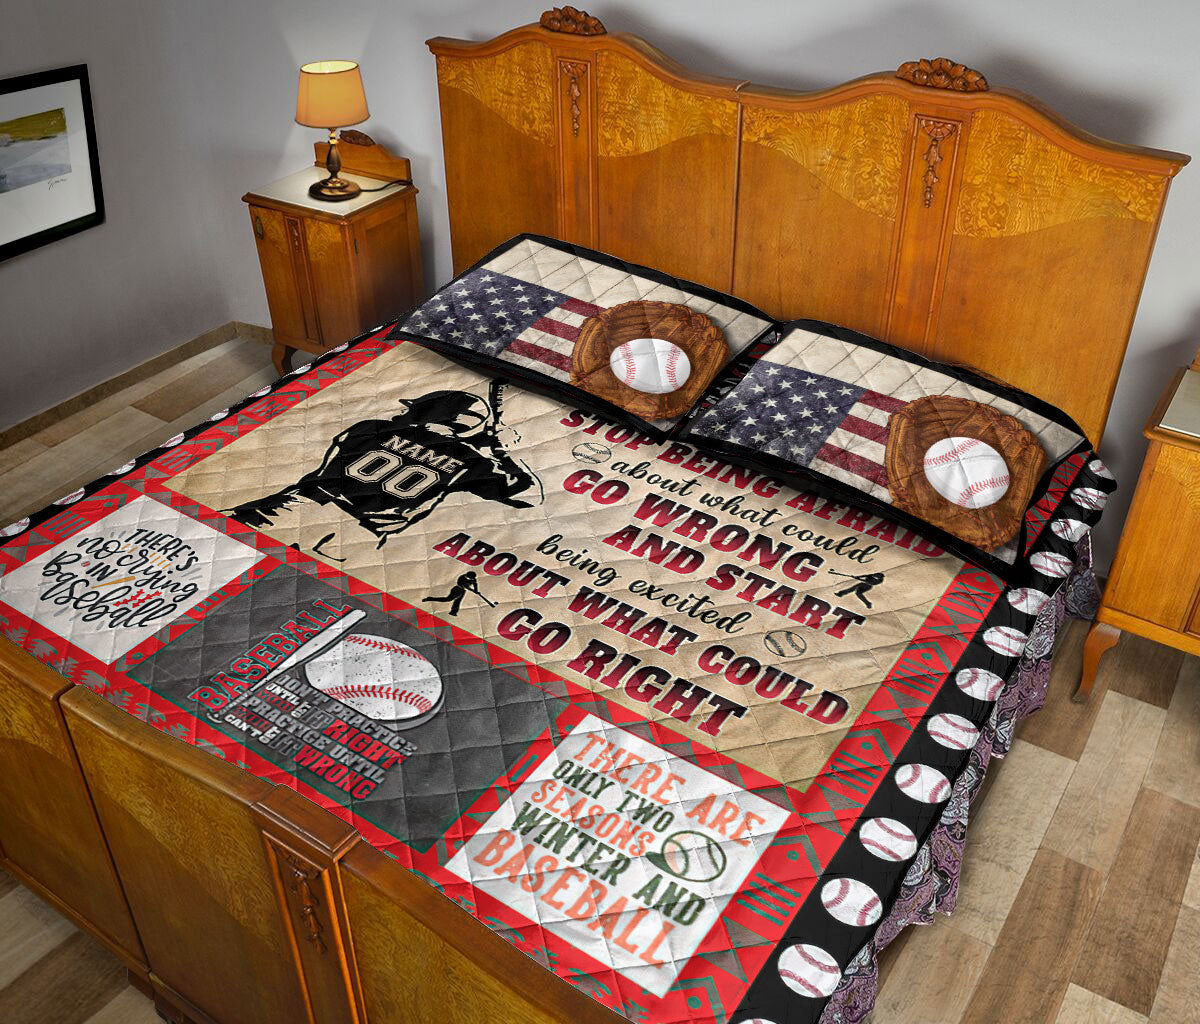 Ohaprints-Quilt-Bed-Set-Pillowcase-Baseball-Player-Fan-Batter-Stop-Being-Afraid-Custom-Personalized-Name-Number-Blanket-Bedspread-Bedding-755-Queen (80'' x 90'')